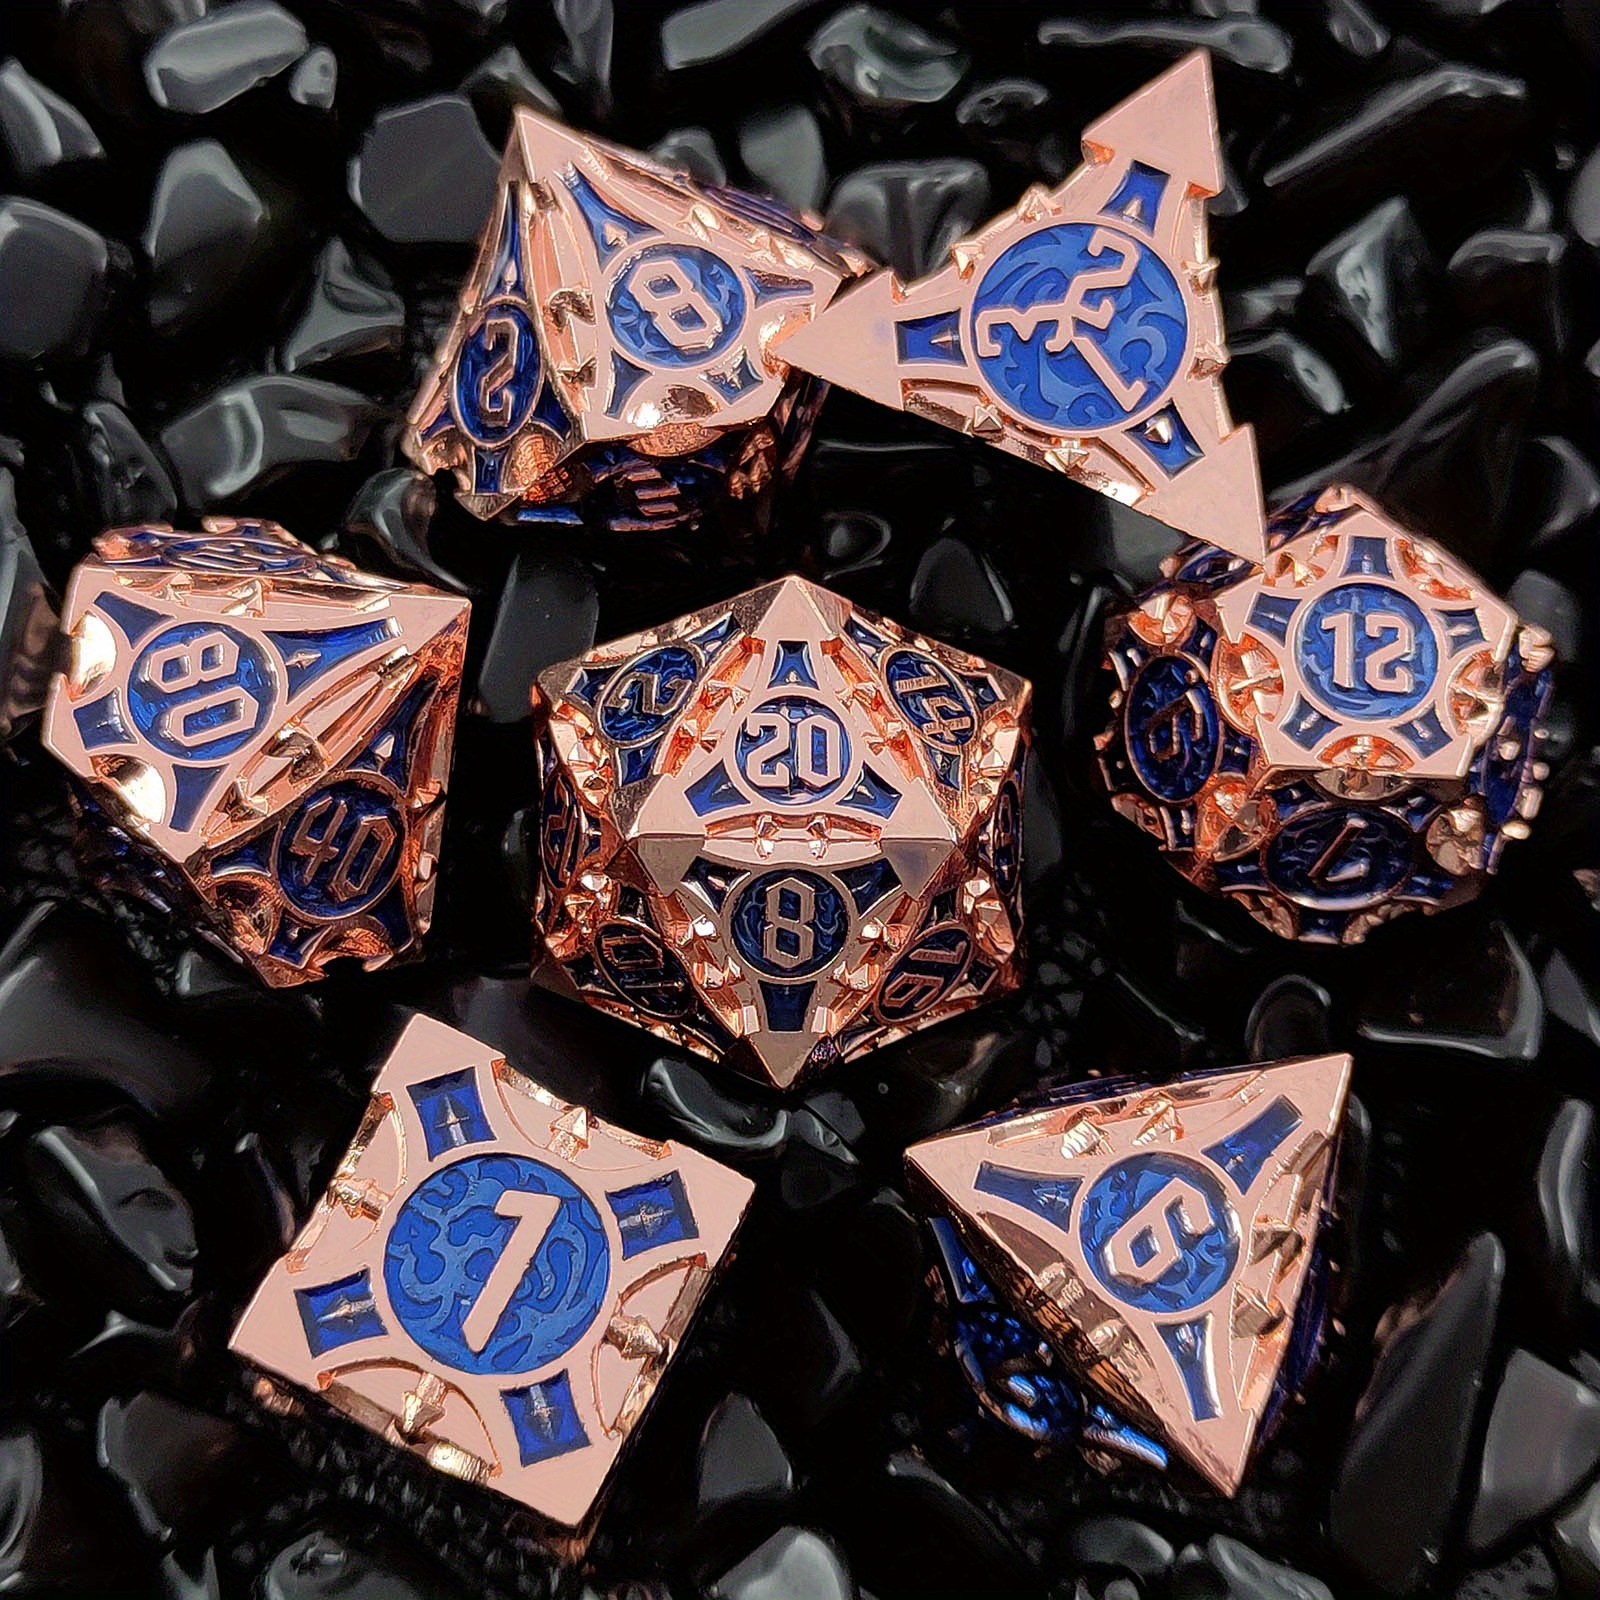  RPG Dice - Metal MTG & DND of D20 Polyhedral Die for Dungeons  and Dragons, Magic The Gathering & More - 20 Sided, Solid Metallic,  Balanced Feel with Smooth Blue Finish